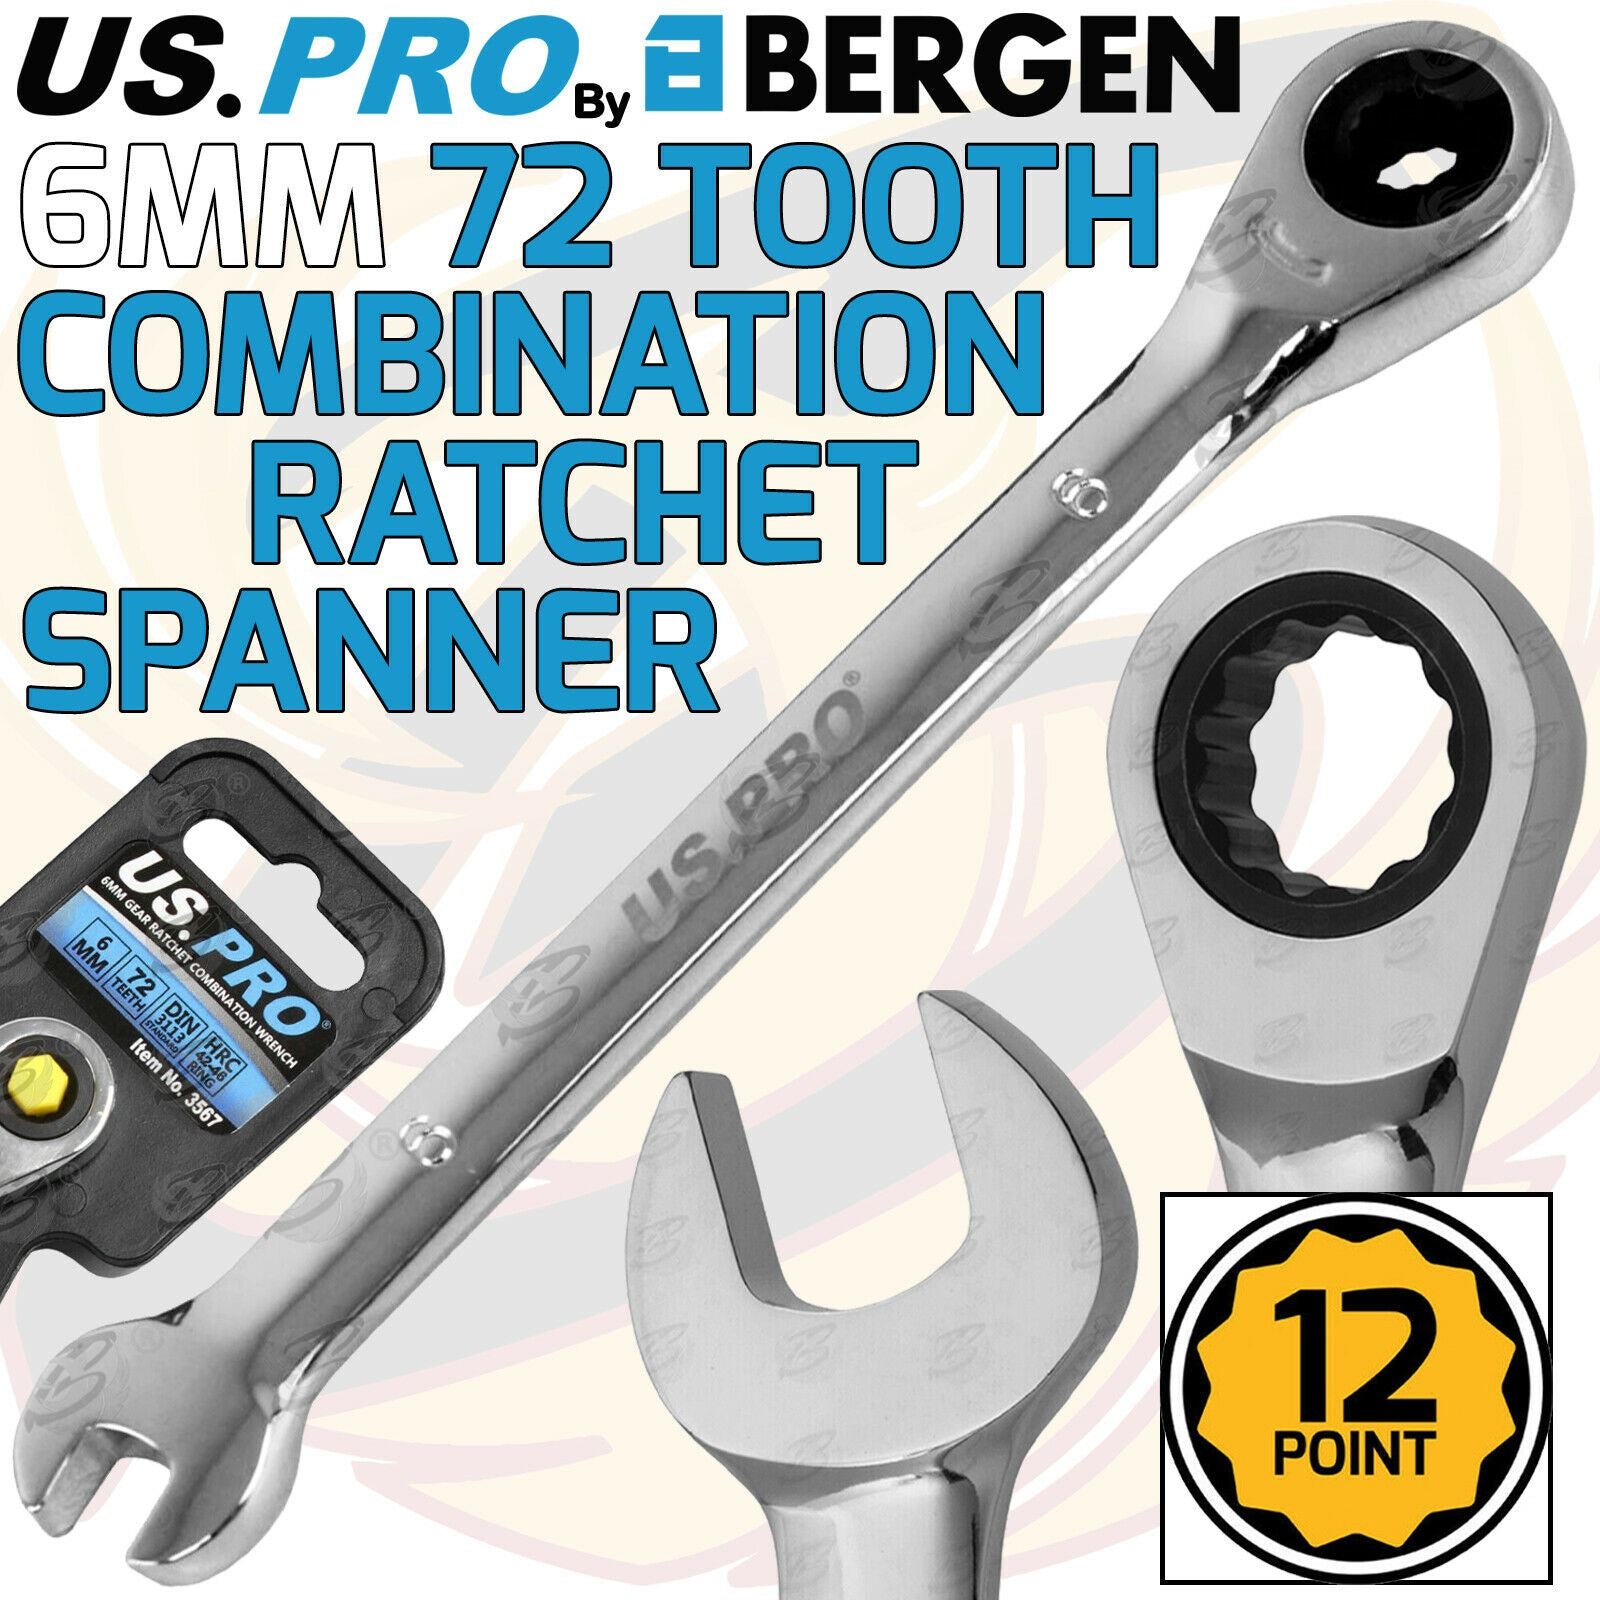 US PRO 6MM 72 TOOTH RATCHET SPANNER